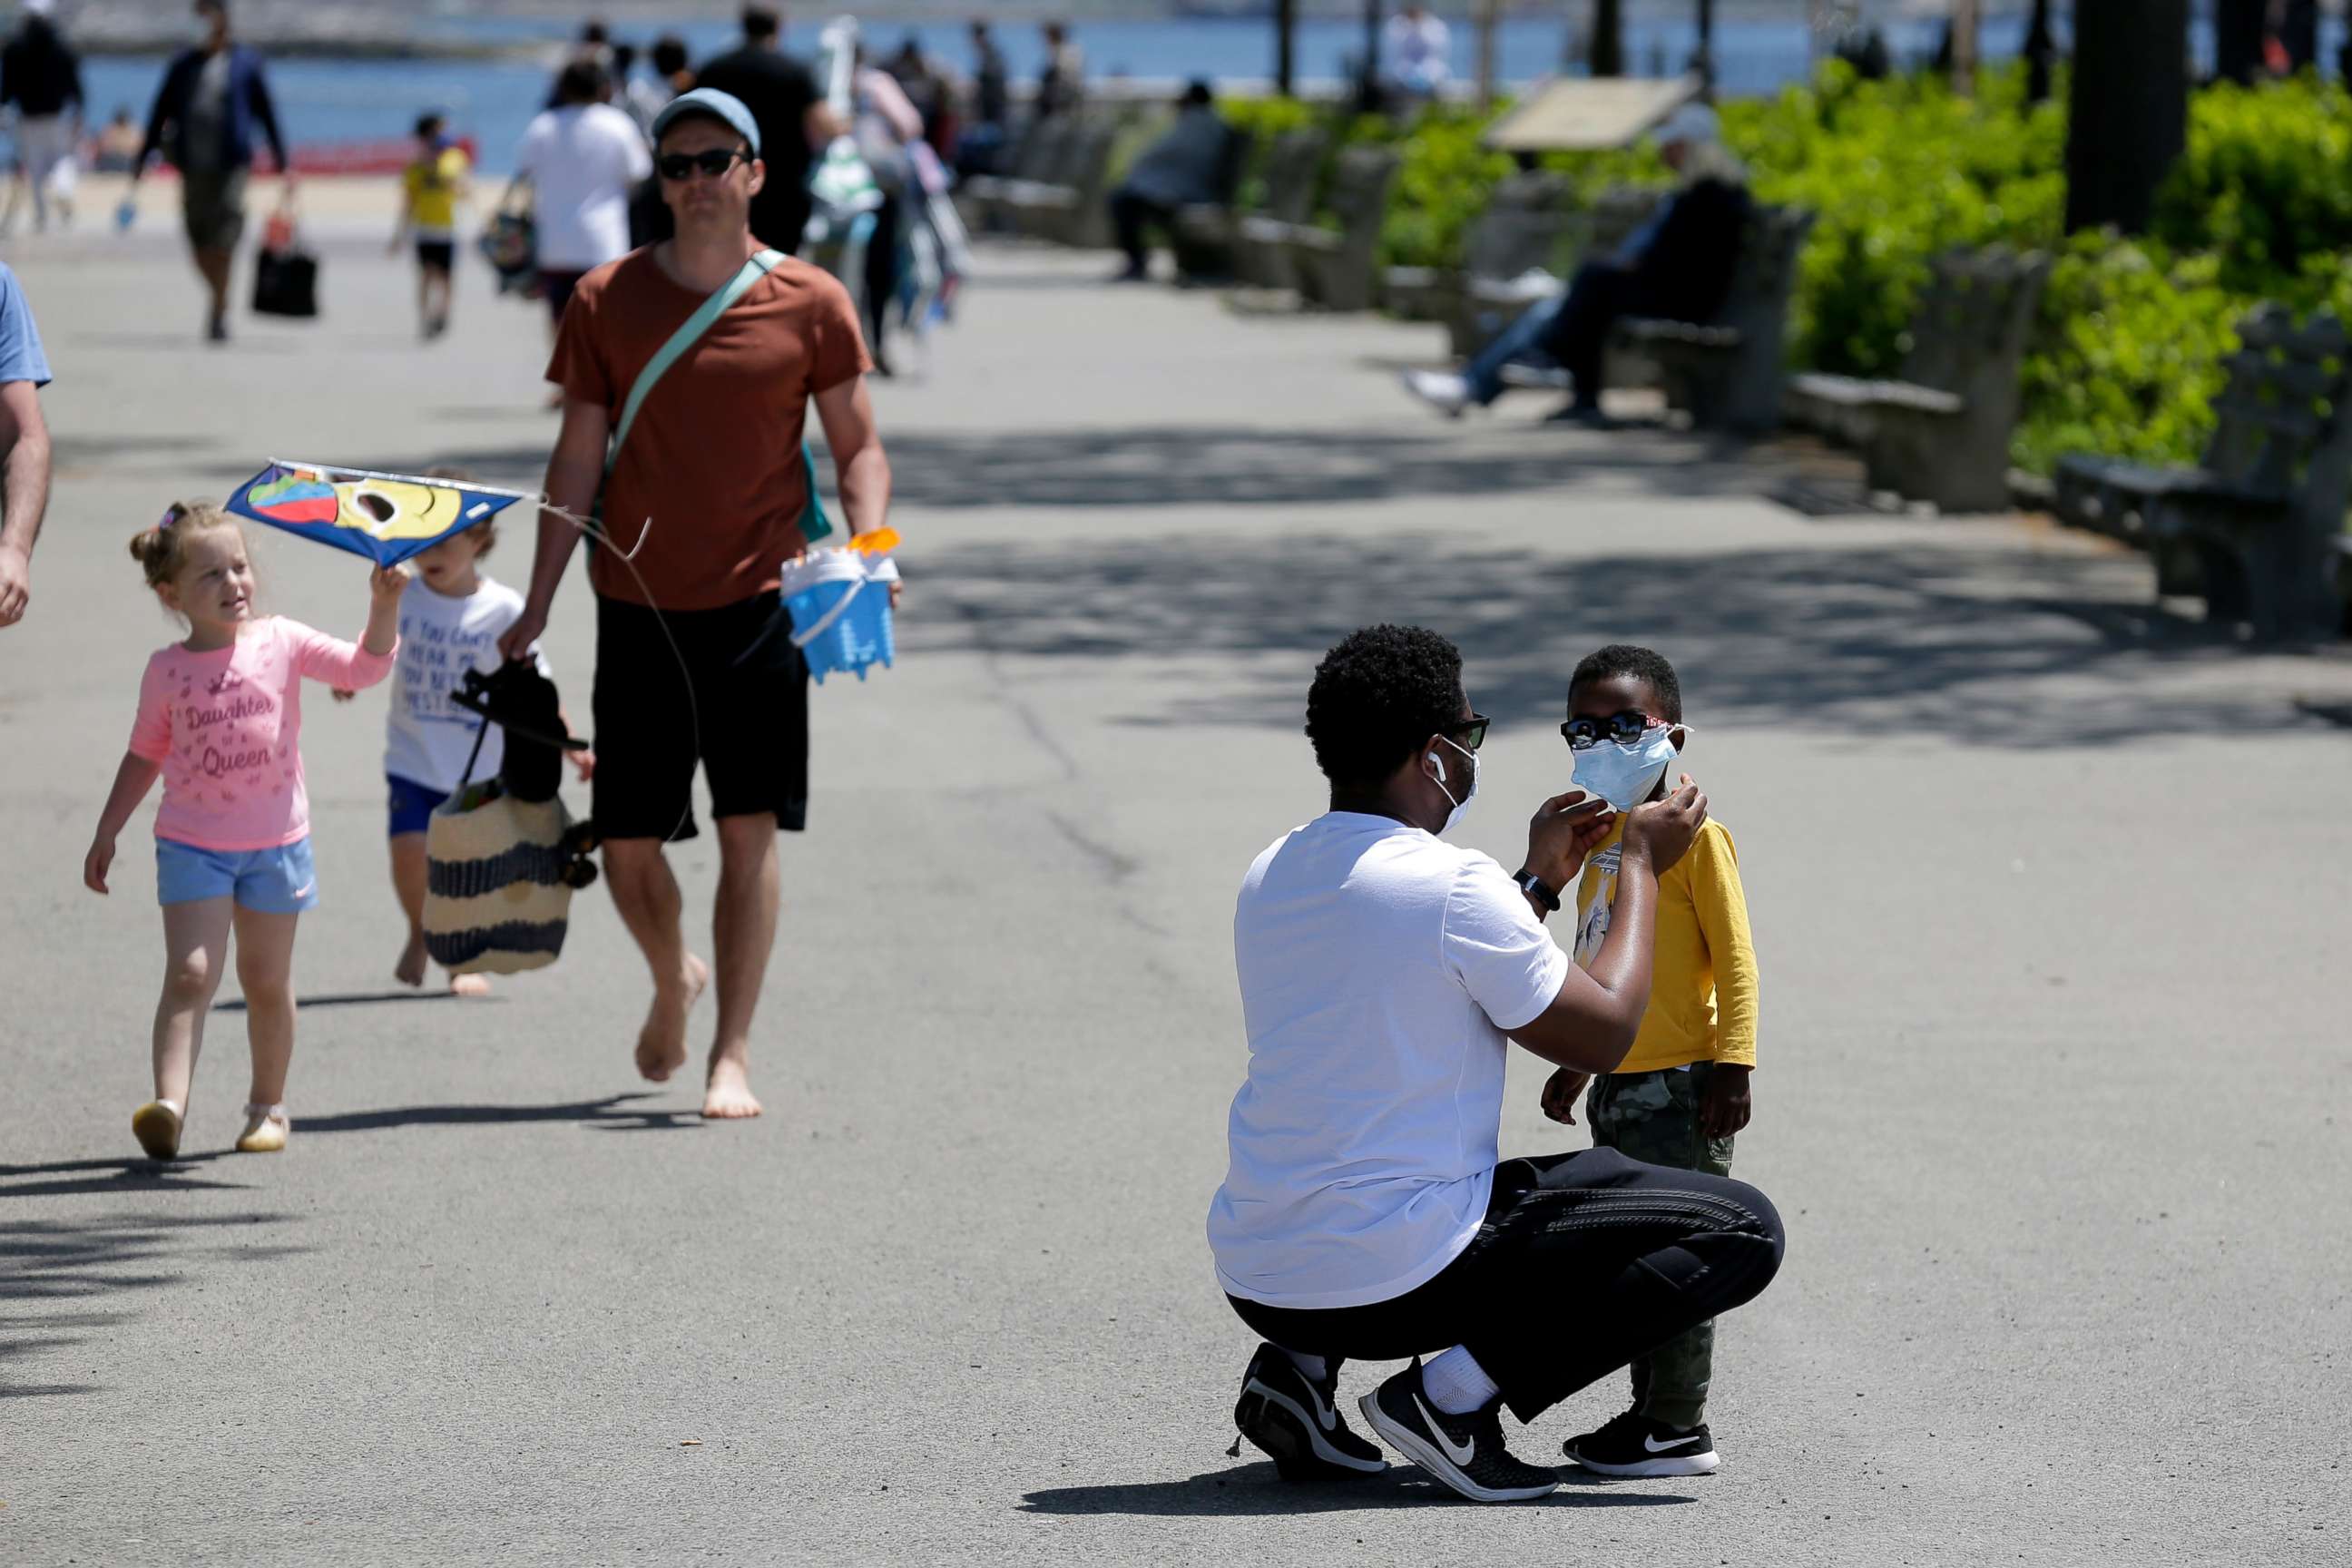 PHOTO: A man adjusts a child's mask before heading out to the sand at Orchard Beach in the Bronx borough of New York, May 17, 2020.